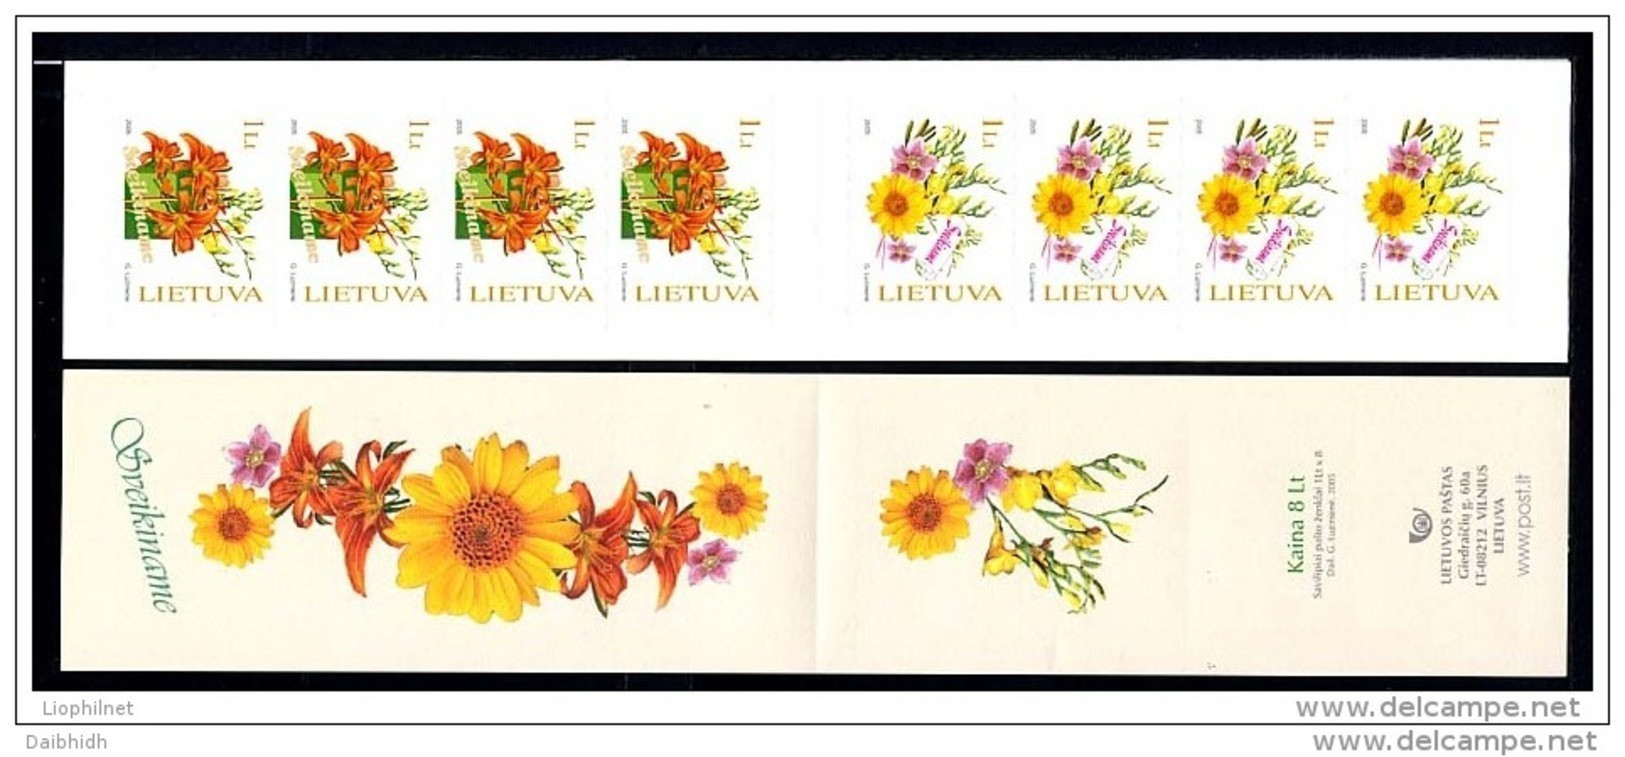 LITHUANIA 2005 Flowers Self-adhesive Booklet  MNH / **.  Michel 866-67 MH - Lituanie